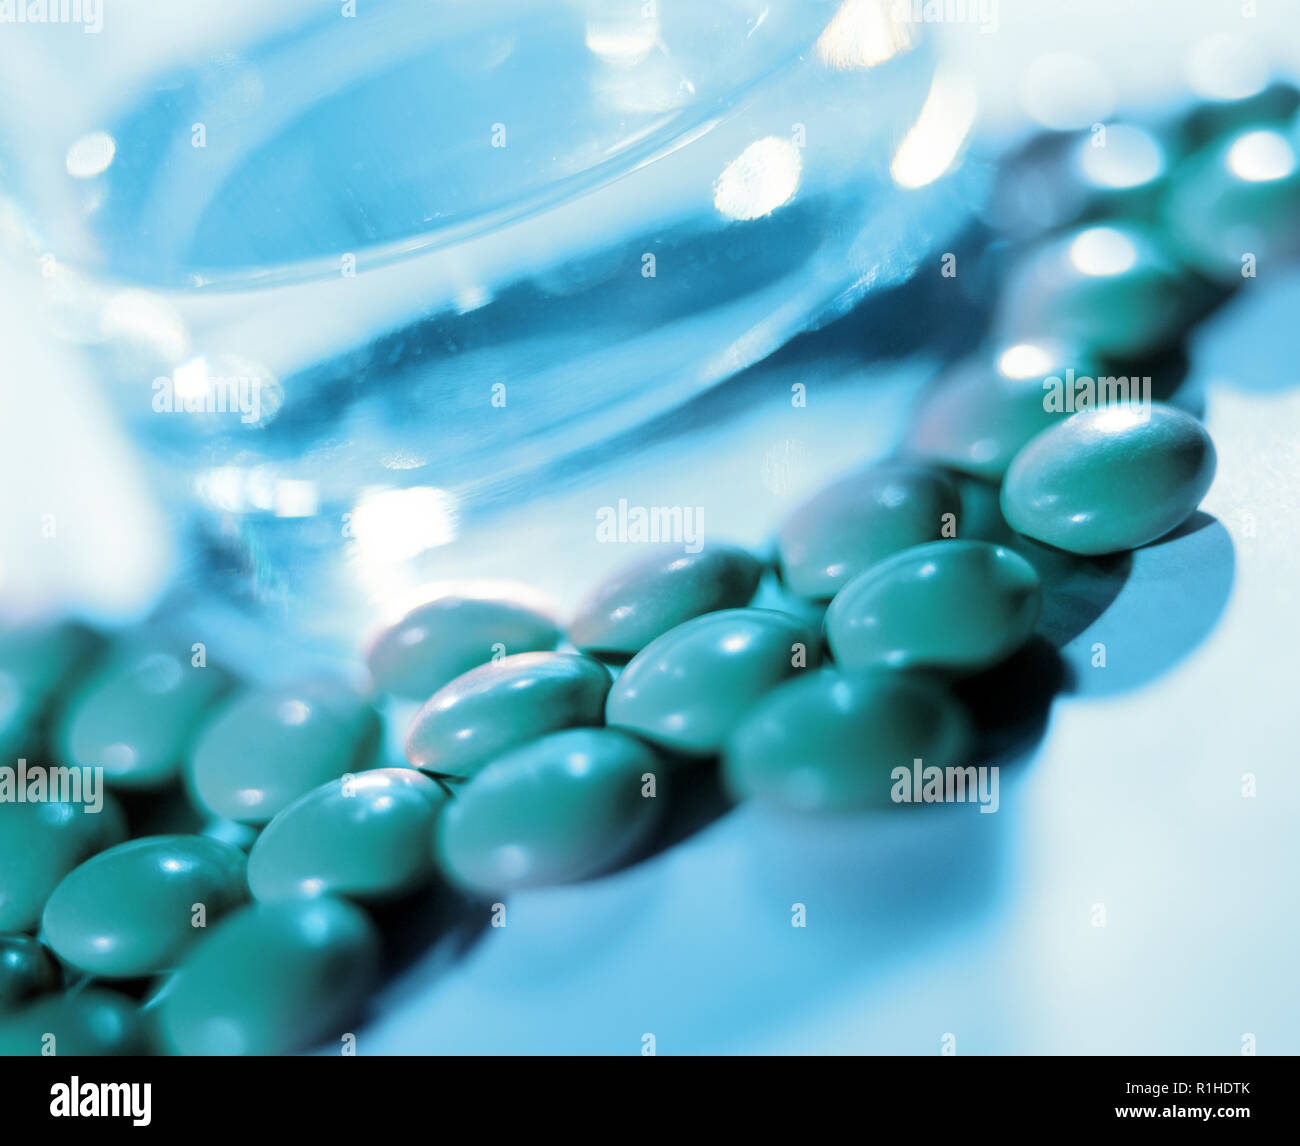 Close-up of pills and glass of water. Stock Photo